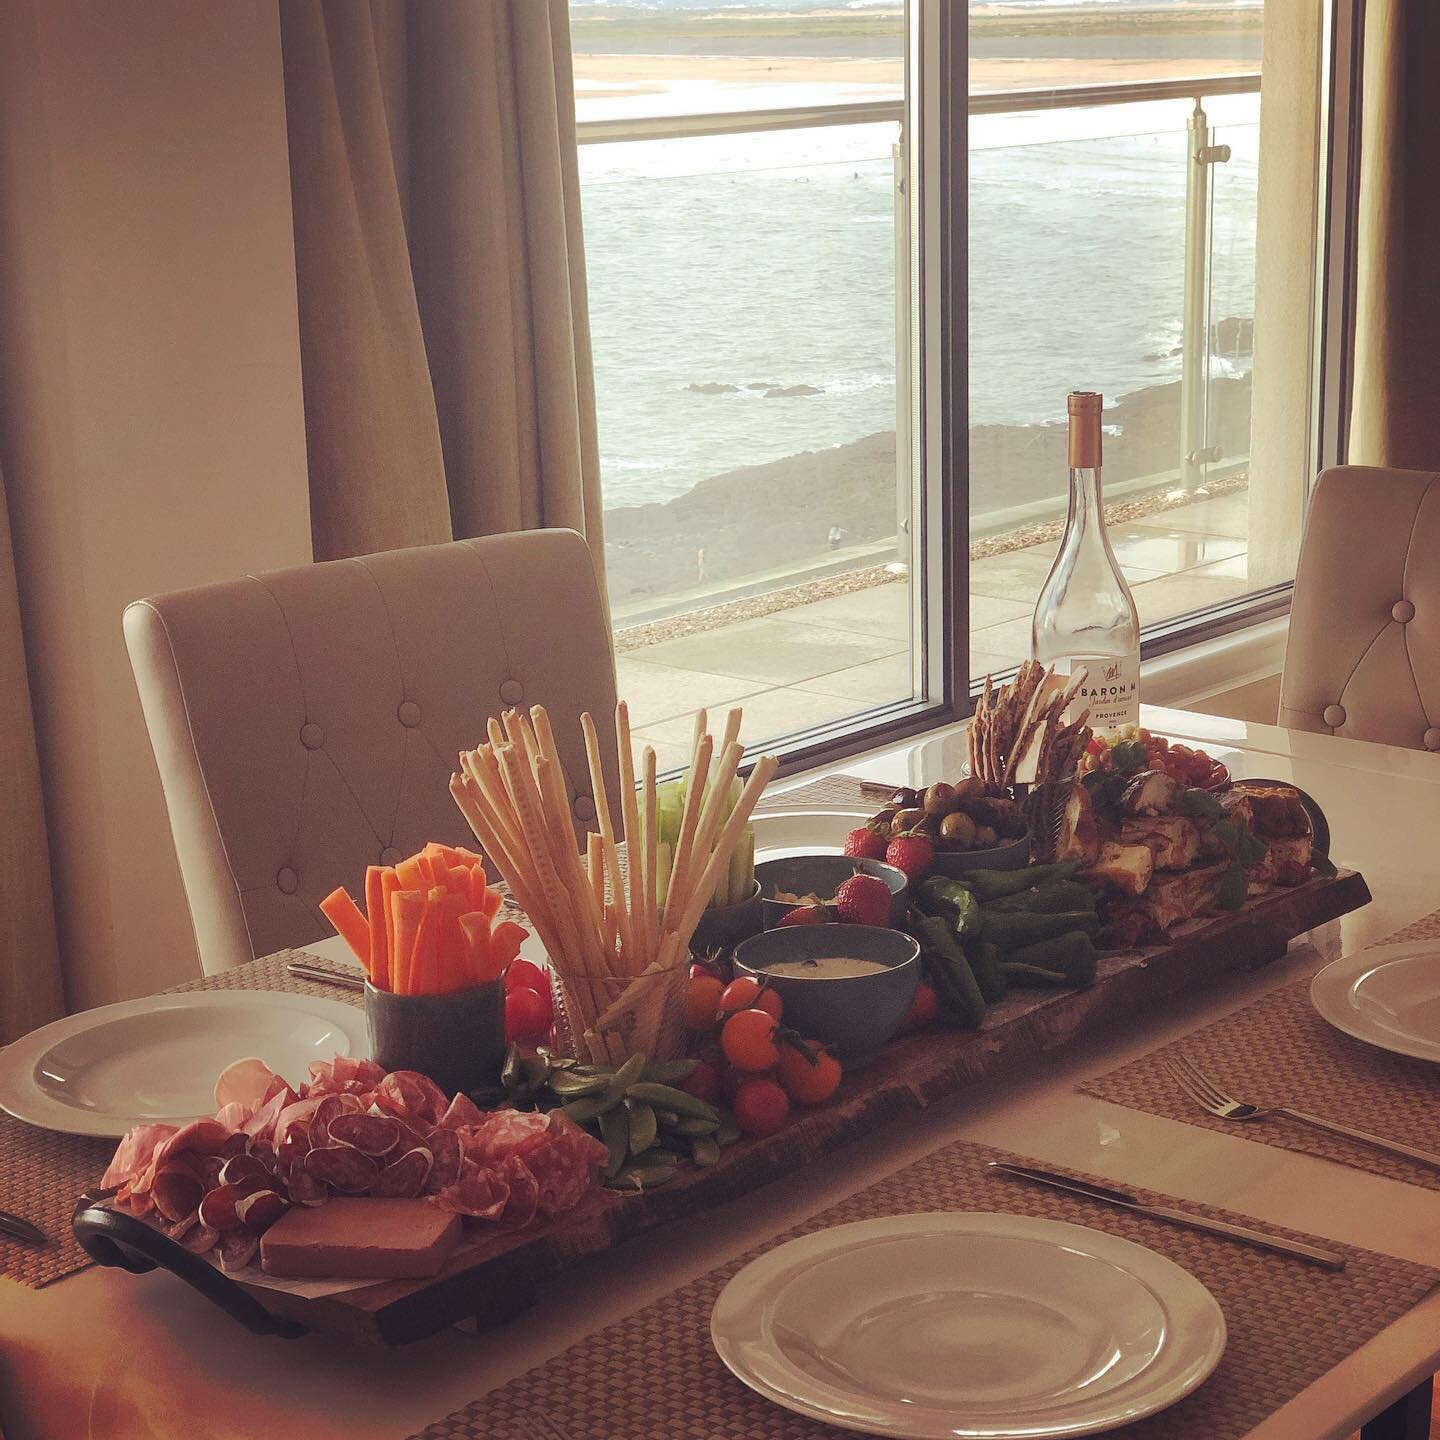 So lovely to see our huge boards in action in their new homes! That is what we call a board with a view! 

Thank you @katiekenrick 

#plattersofinstagram #thesunnyset #sharingboard #grazingboard #homedecor #beachlife